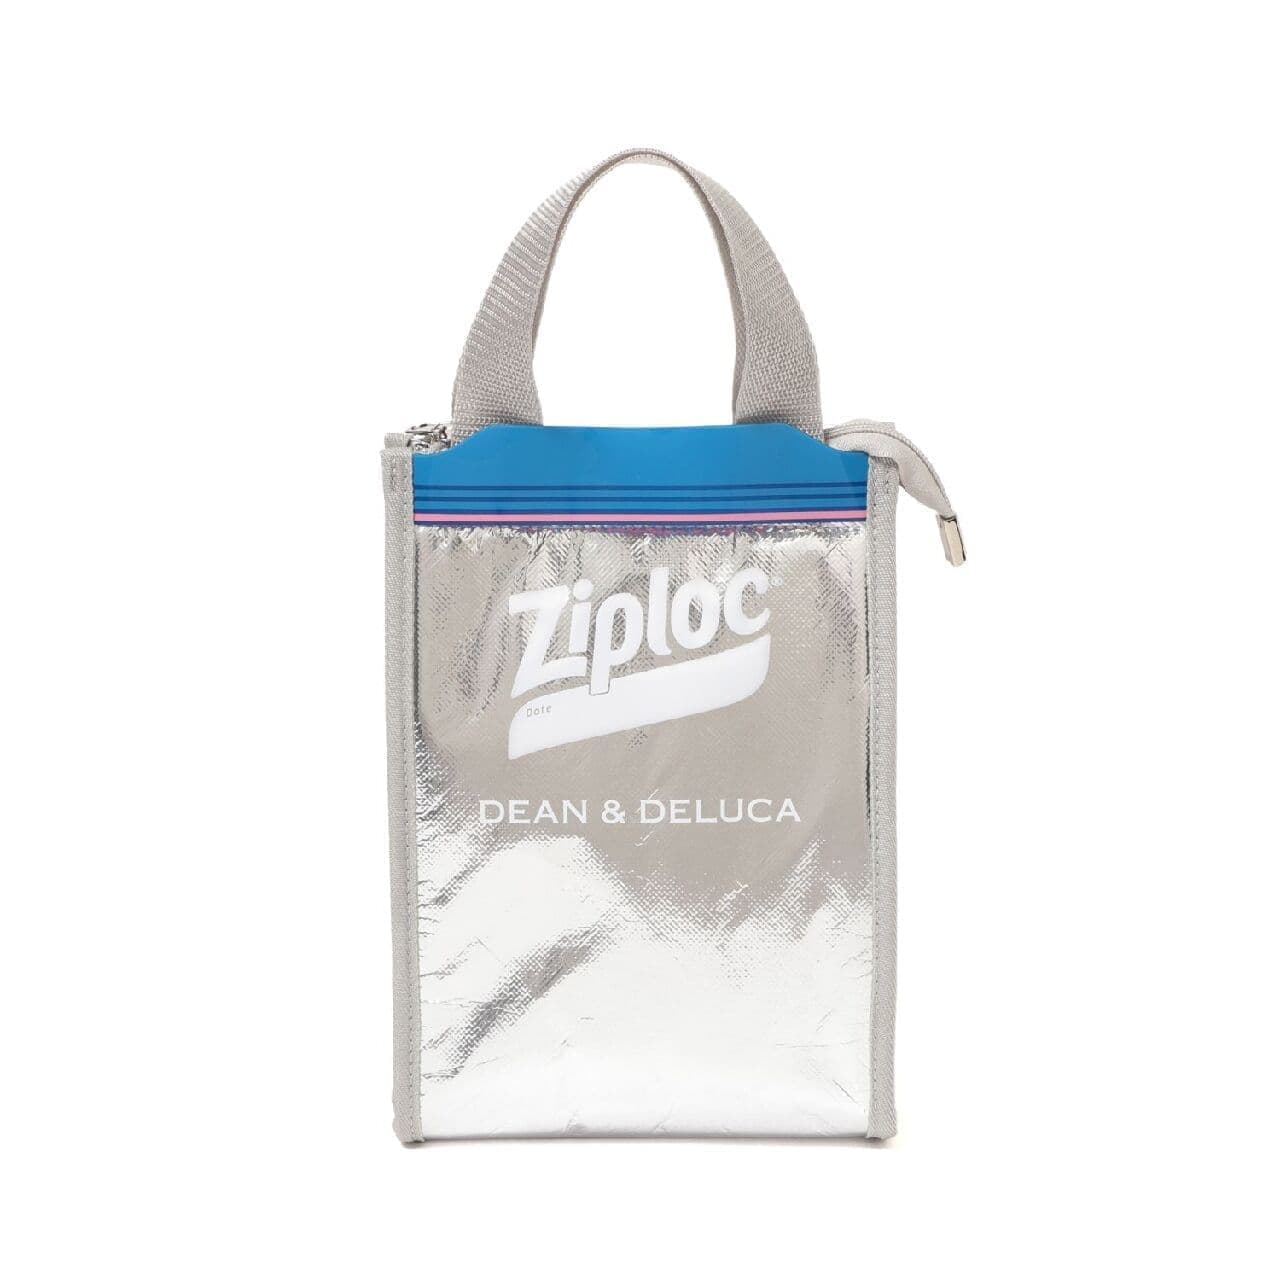 Newly improved Ziploc cooler bag sold out in one day --Triple collaboration with DEAN & DELUCA x BEAMS COUTURE